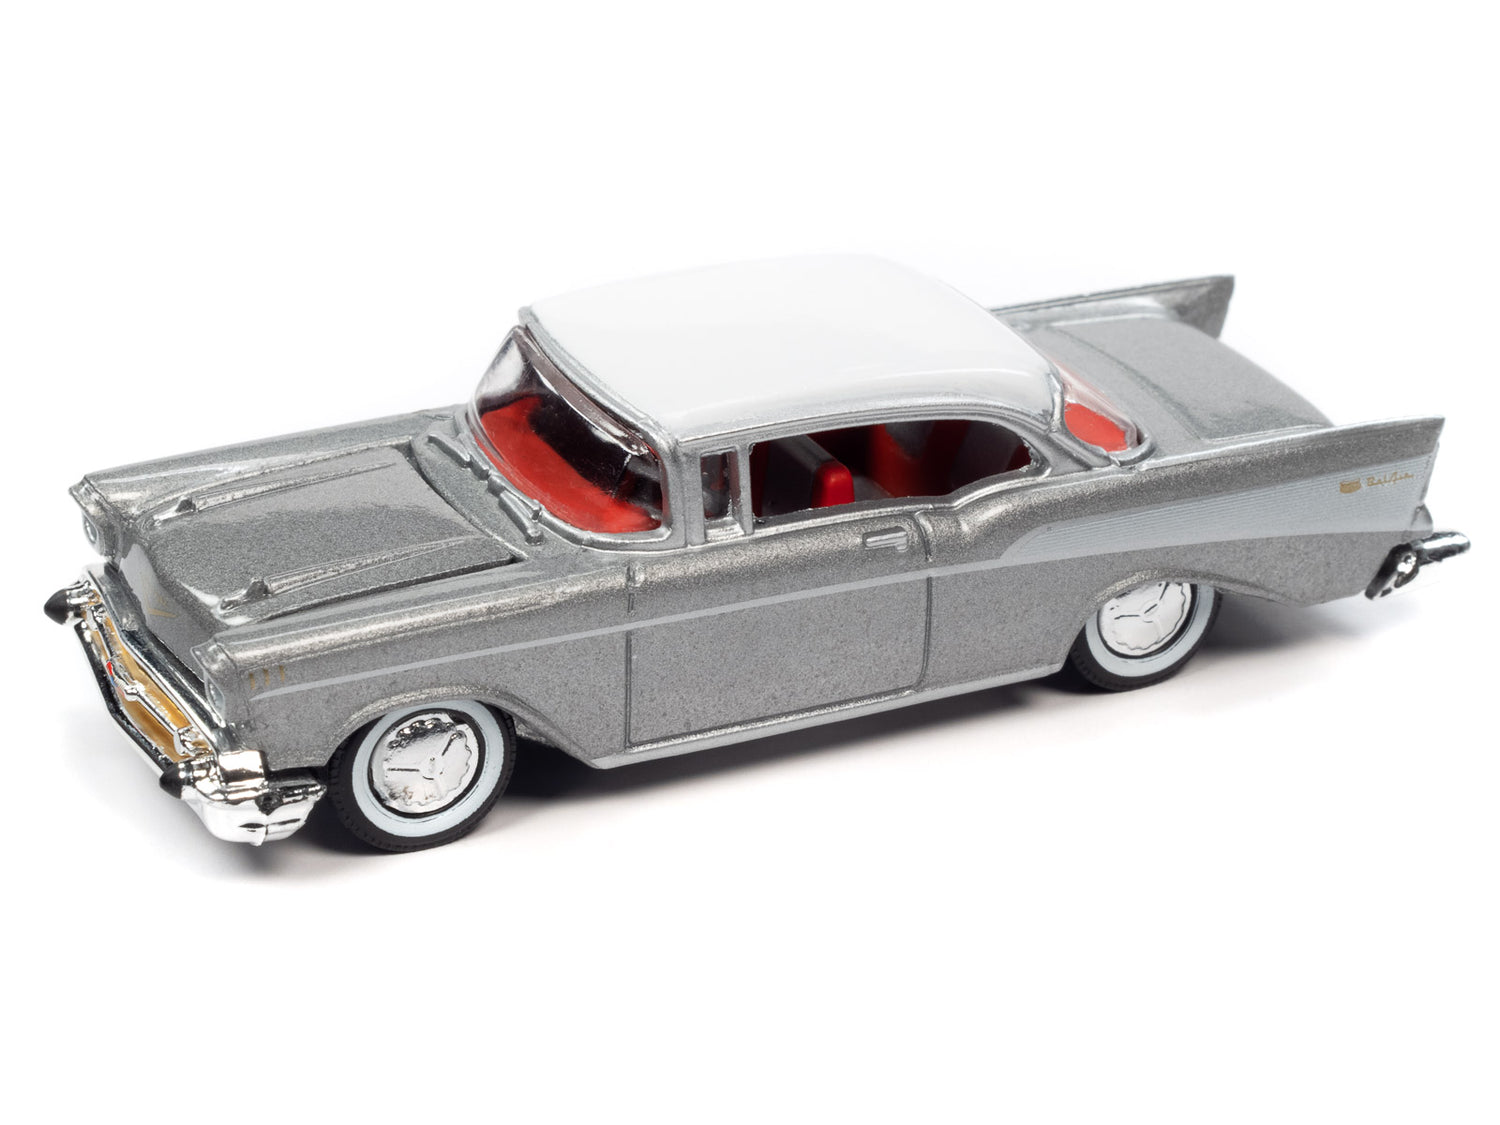 Racing Champions 1957 Chevy Bel Air Hardtop 1:64 Scale Diecast